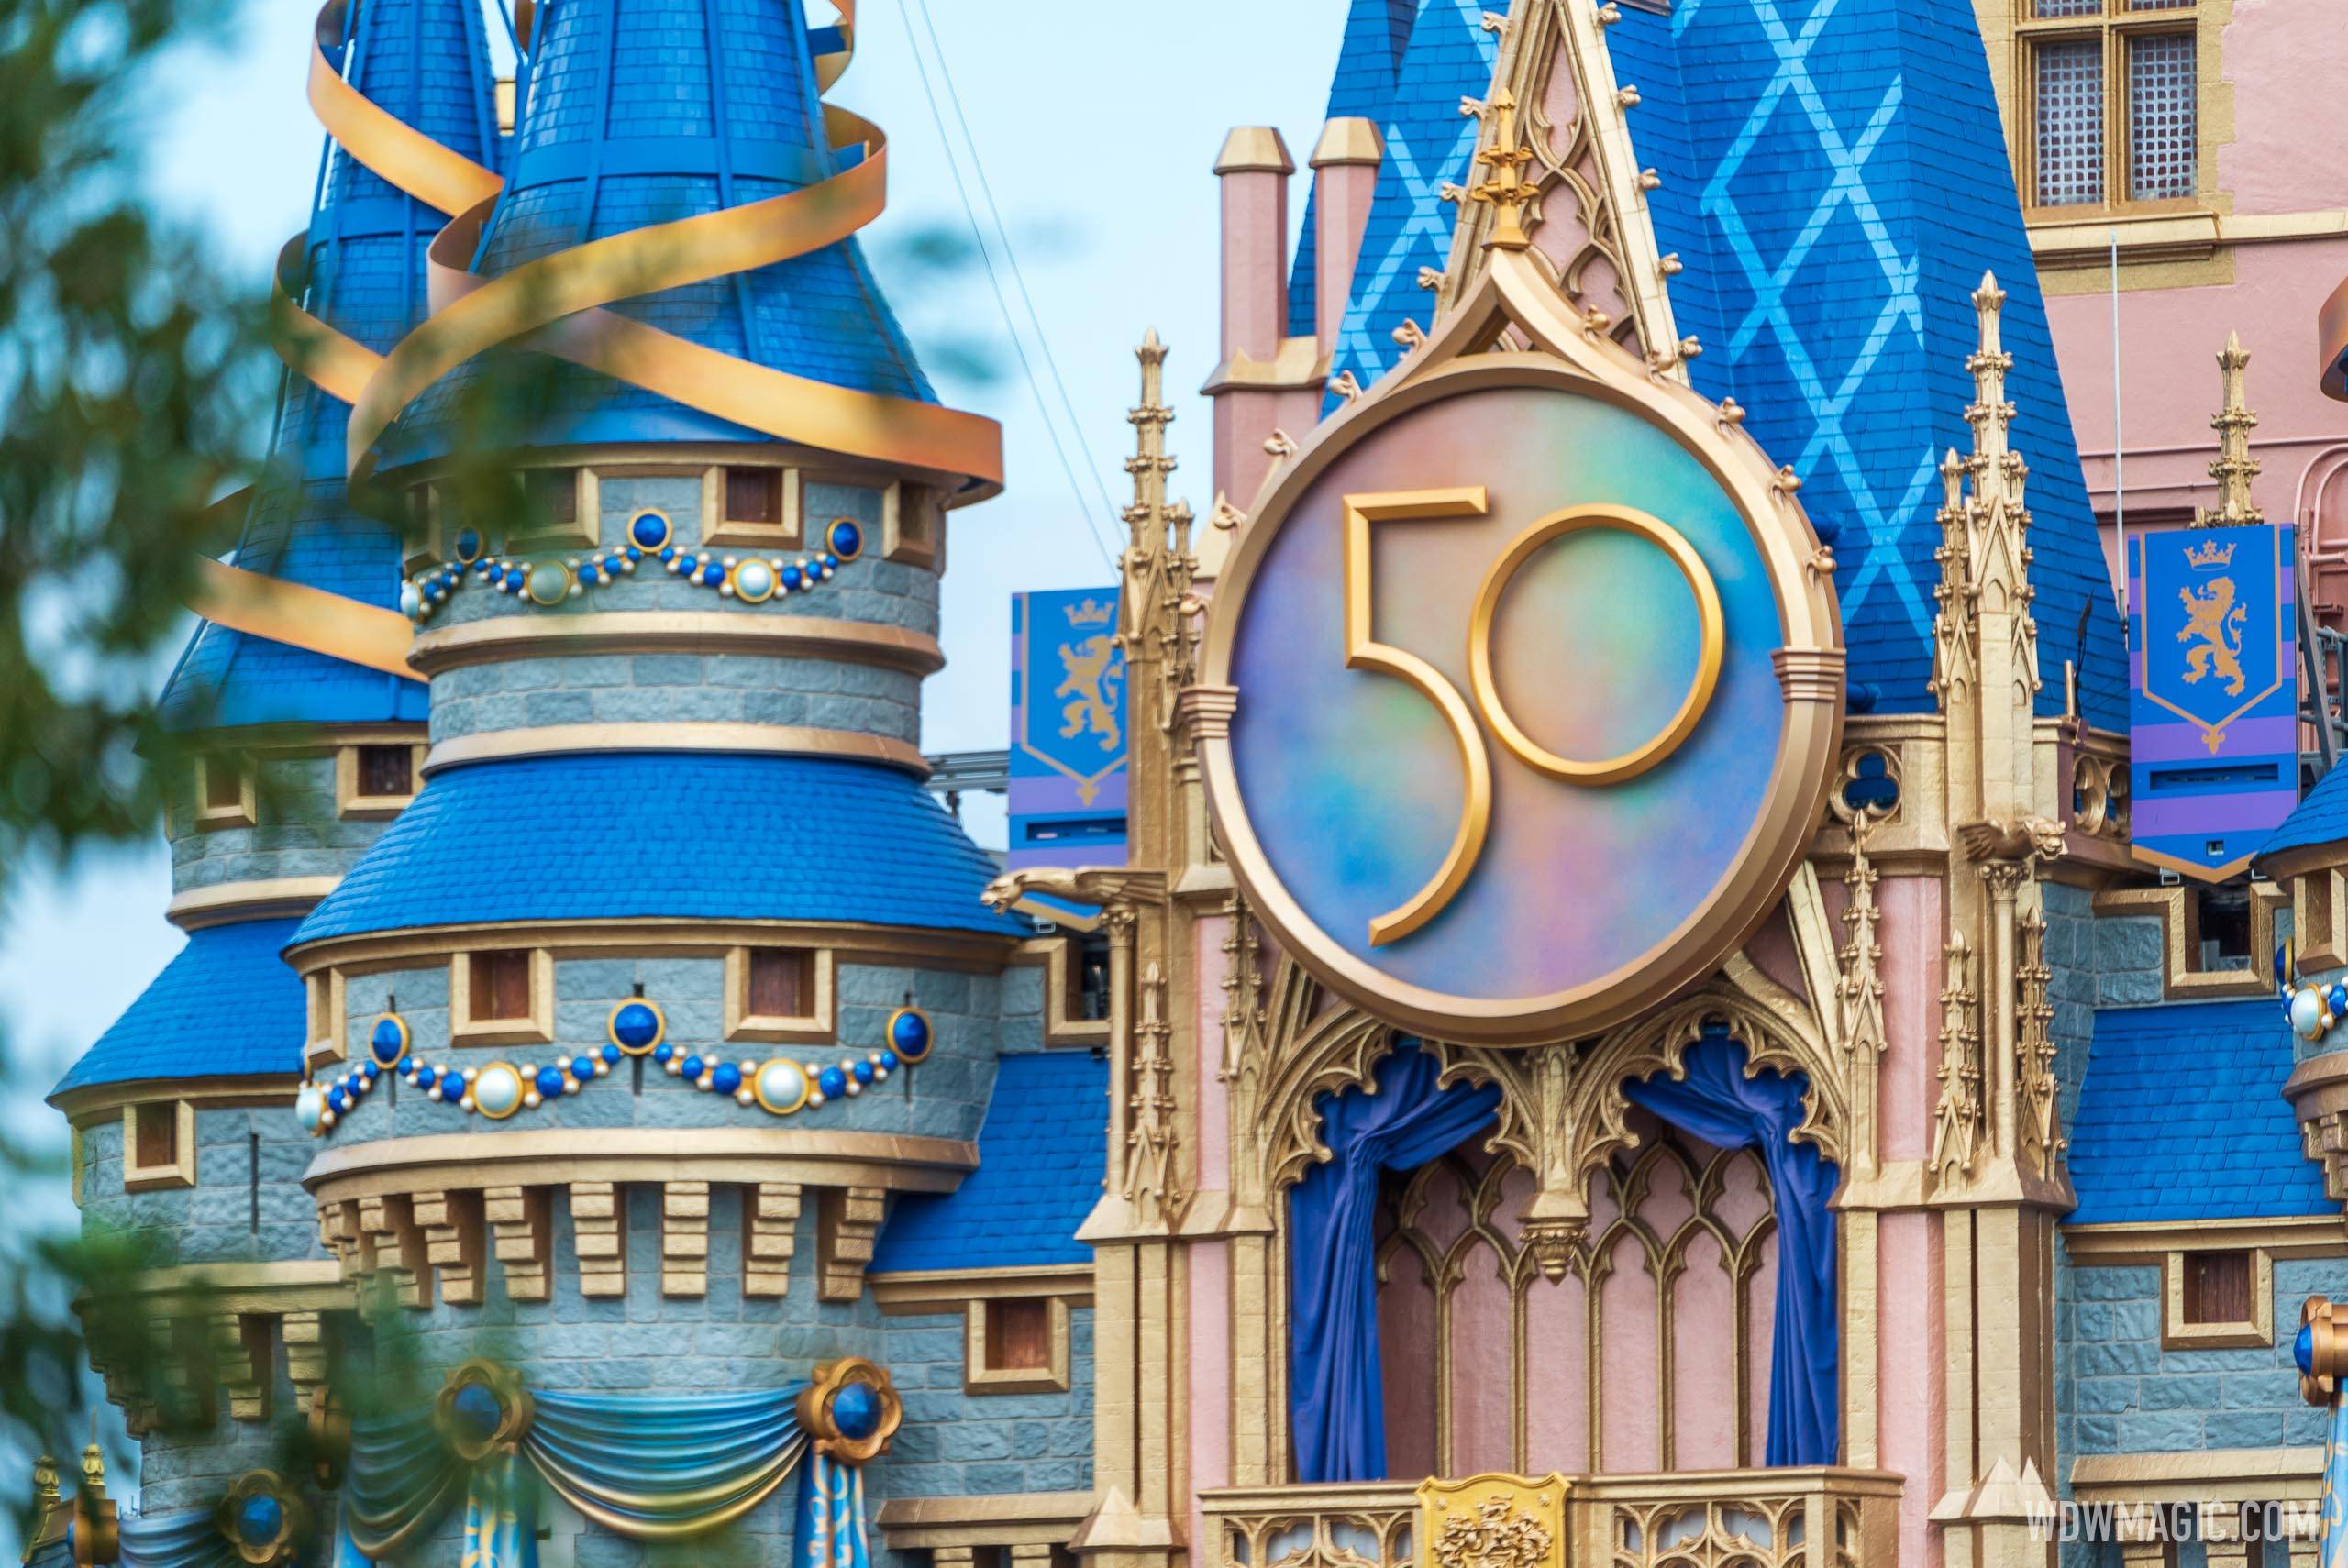 The event will celebrate 50 years of Walt Disney World